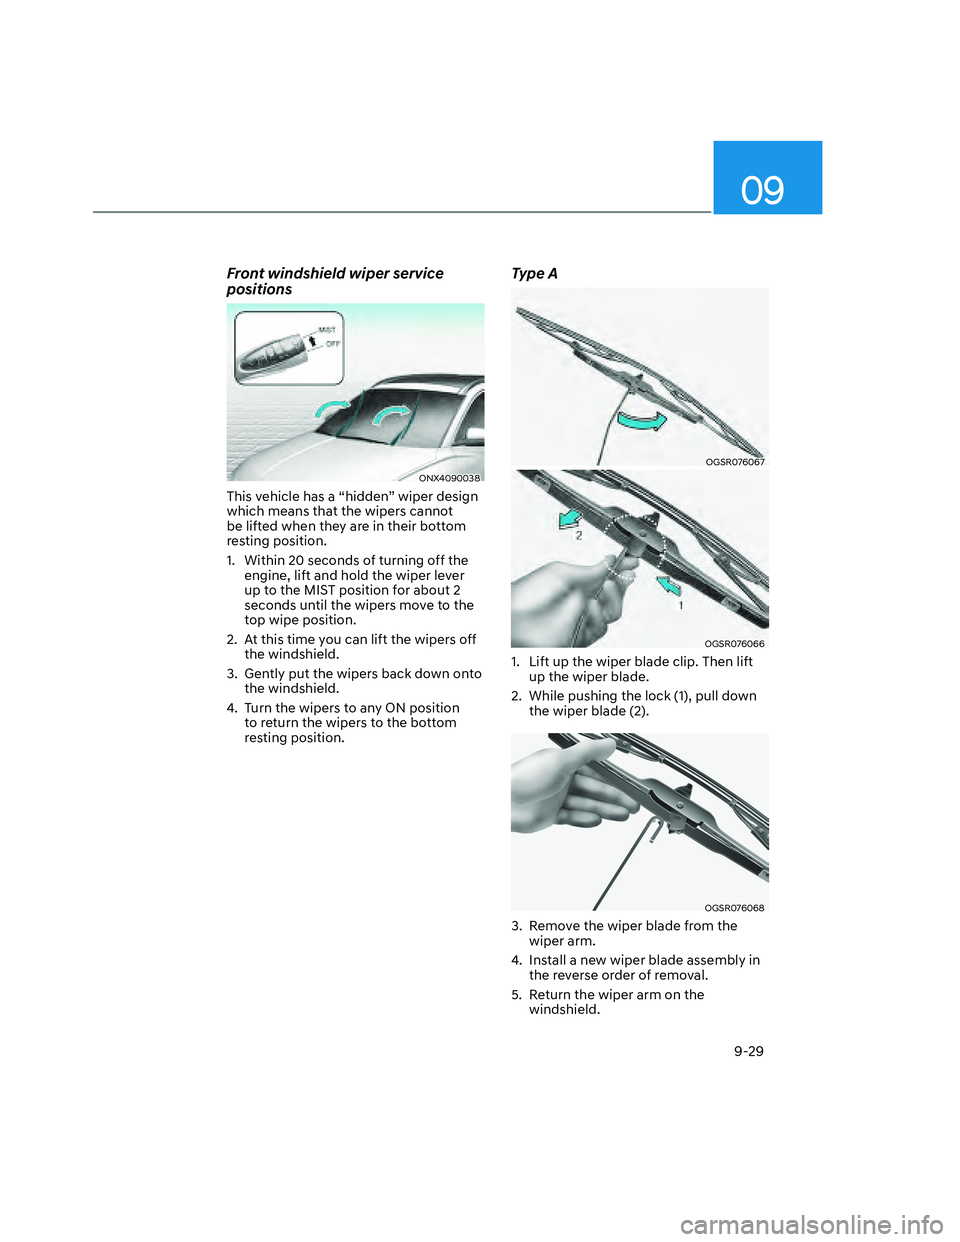 HYUNDAI SANTA CRUZ 2022  Owners Manual 09
9-29
Front windshield wiper service 
positions
ONX4090038ONX4090038
This vehicle has a “hidden” wiper design 
which means that the wipers cannot 
be lifted when they are in their bottom 
restin